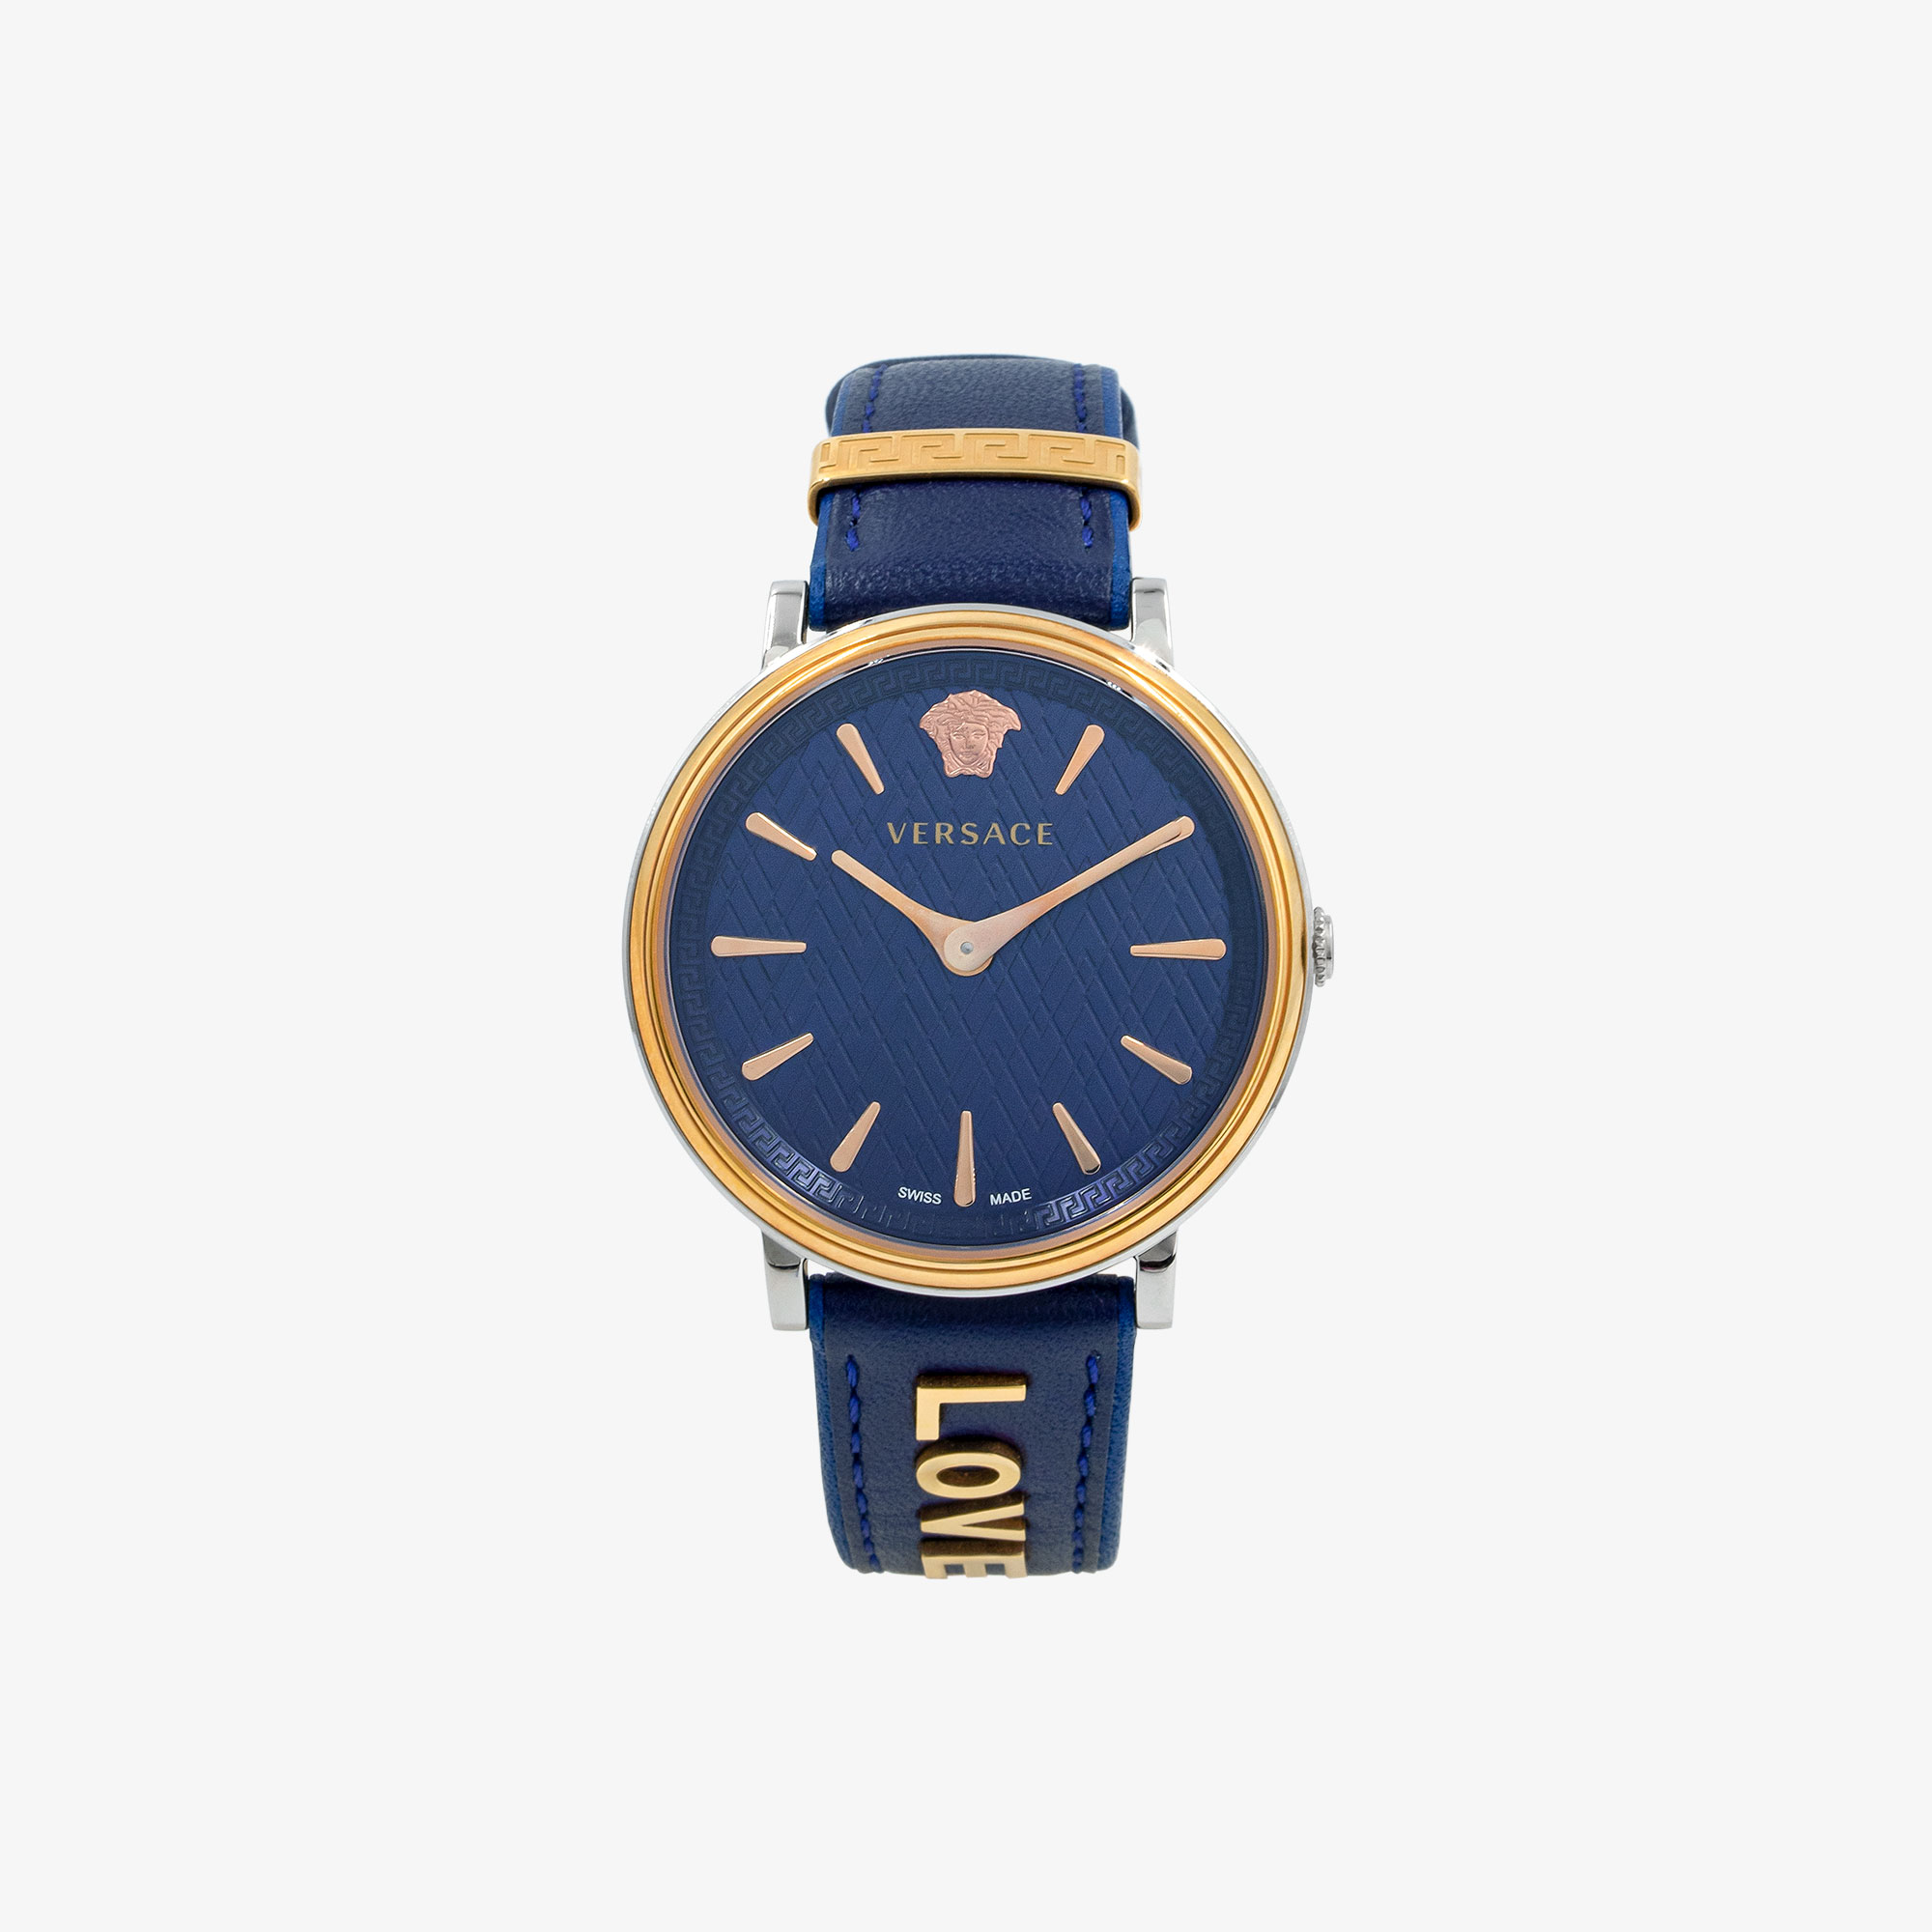 VERSACE V-CIRCLE WATCH WITH BLUE LEATHER STRAP / LOVE